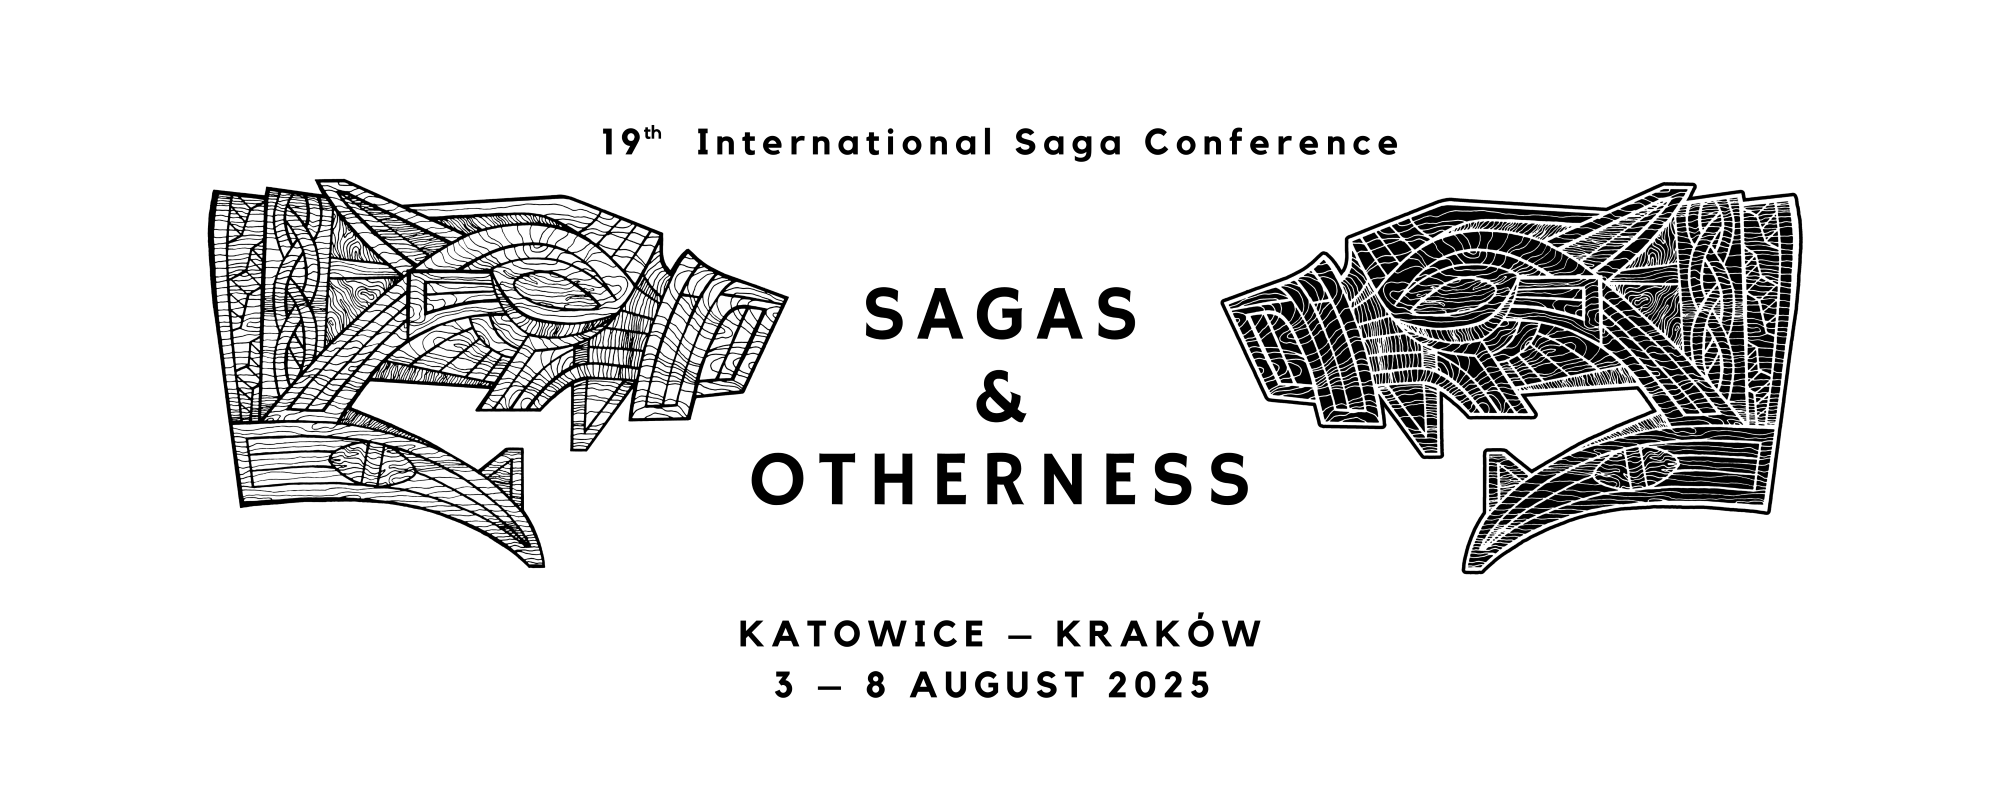 Sagas and otherness logo